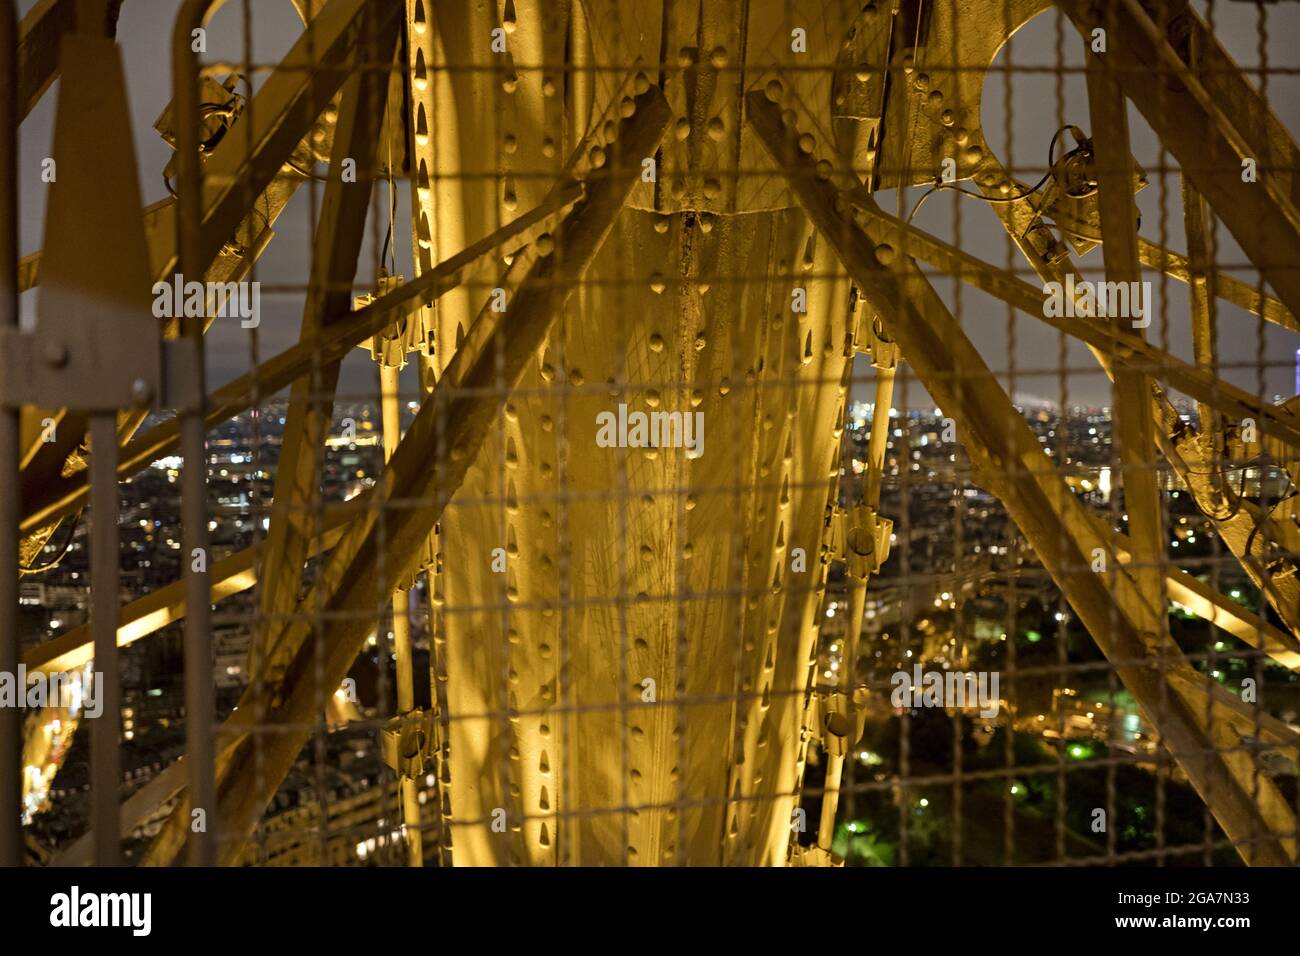 Iron, steel and copper pipes of the famous Tour Eiffel seen at night, in Paris. Stock Photo